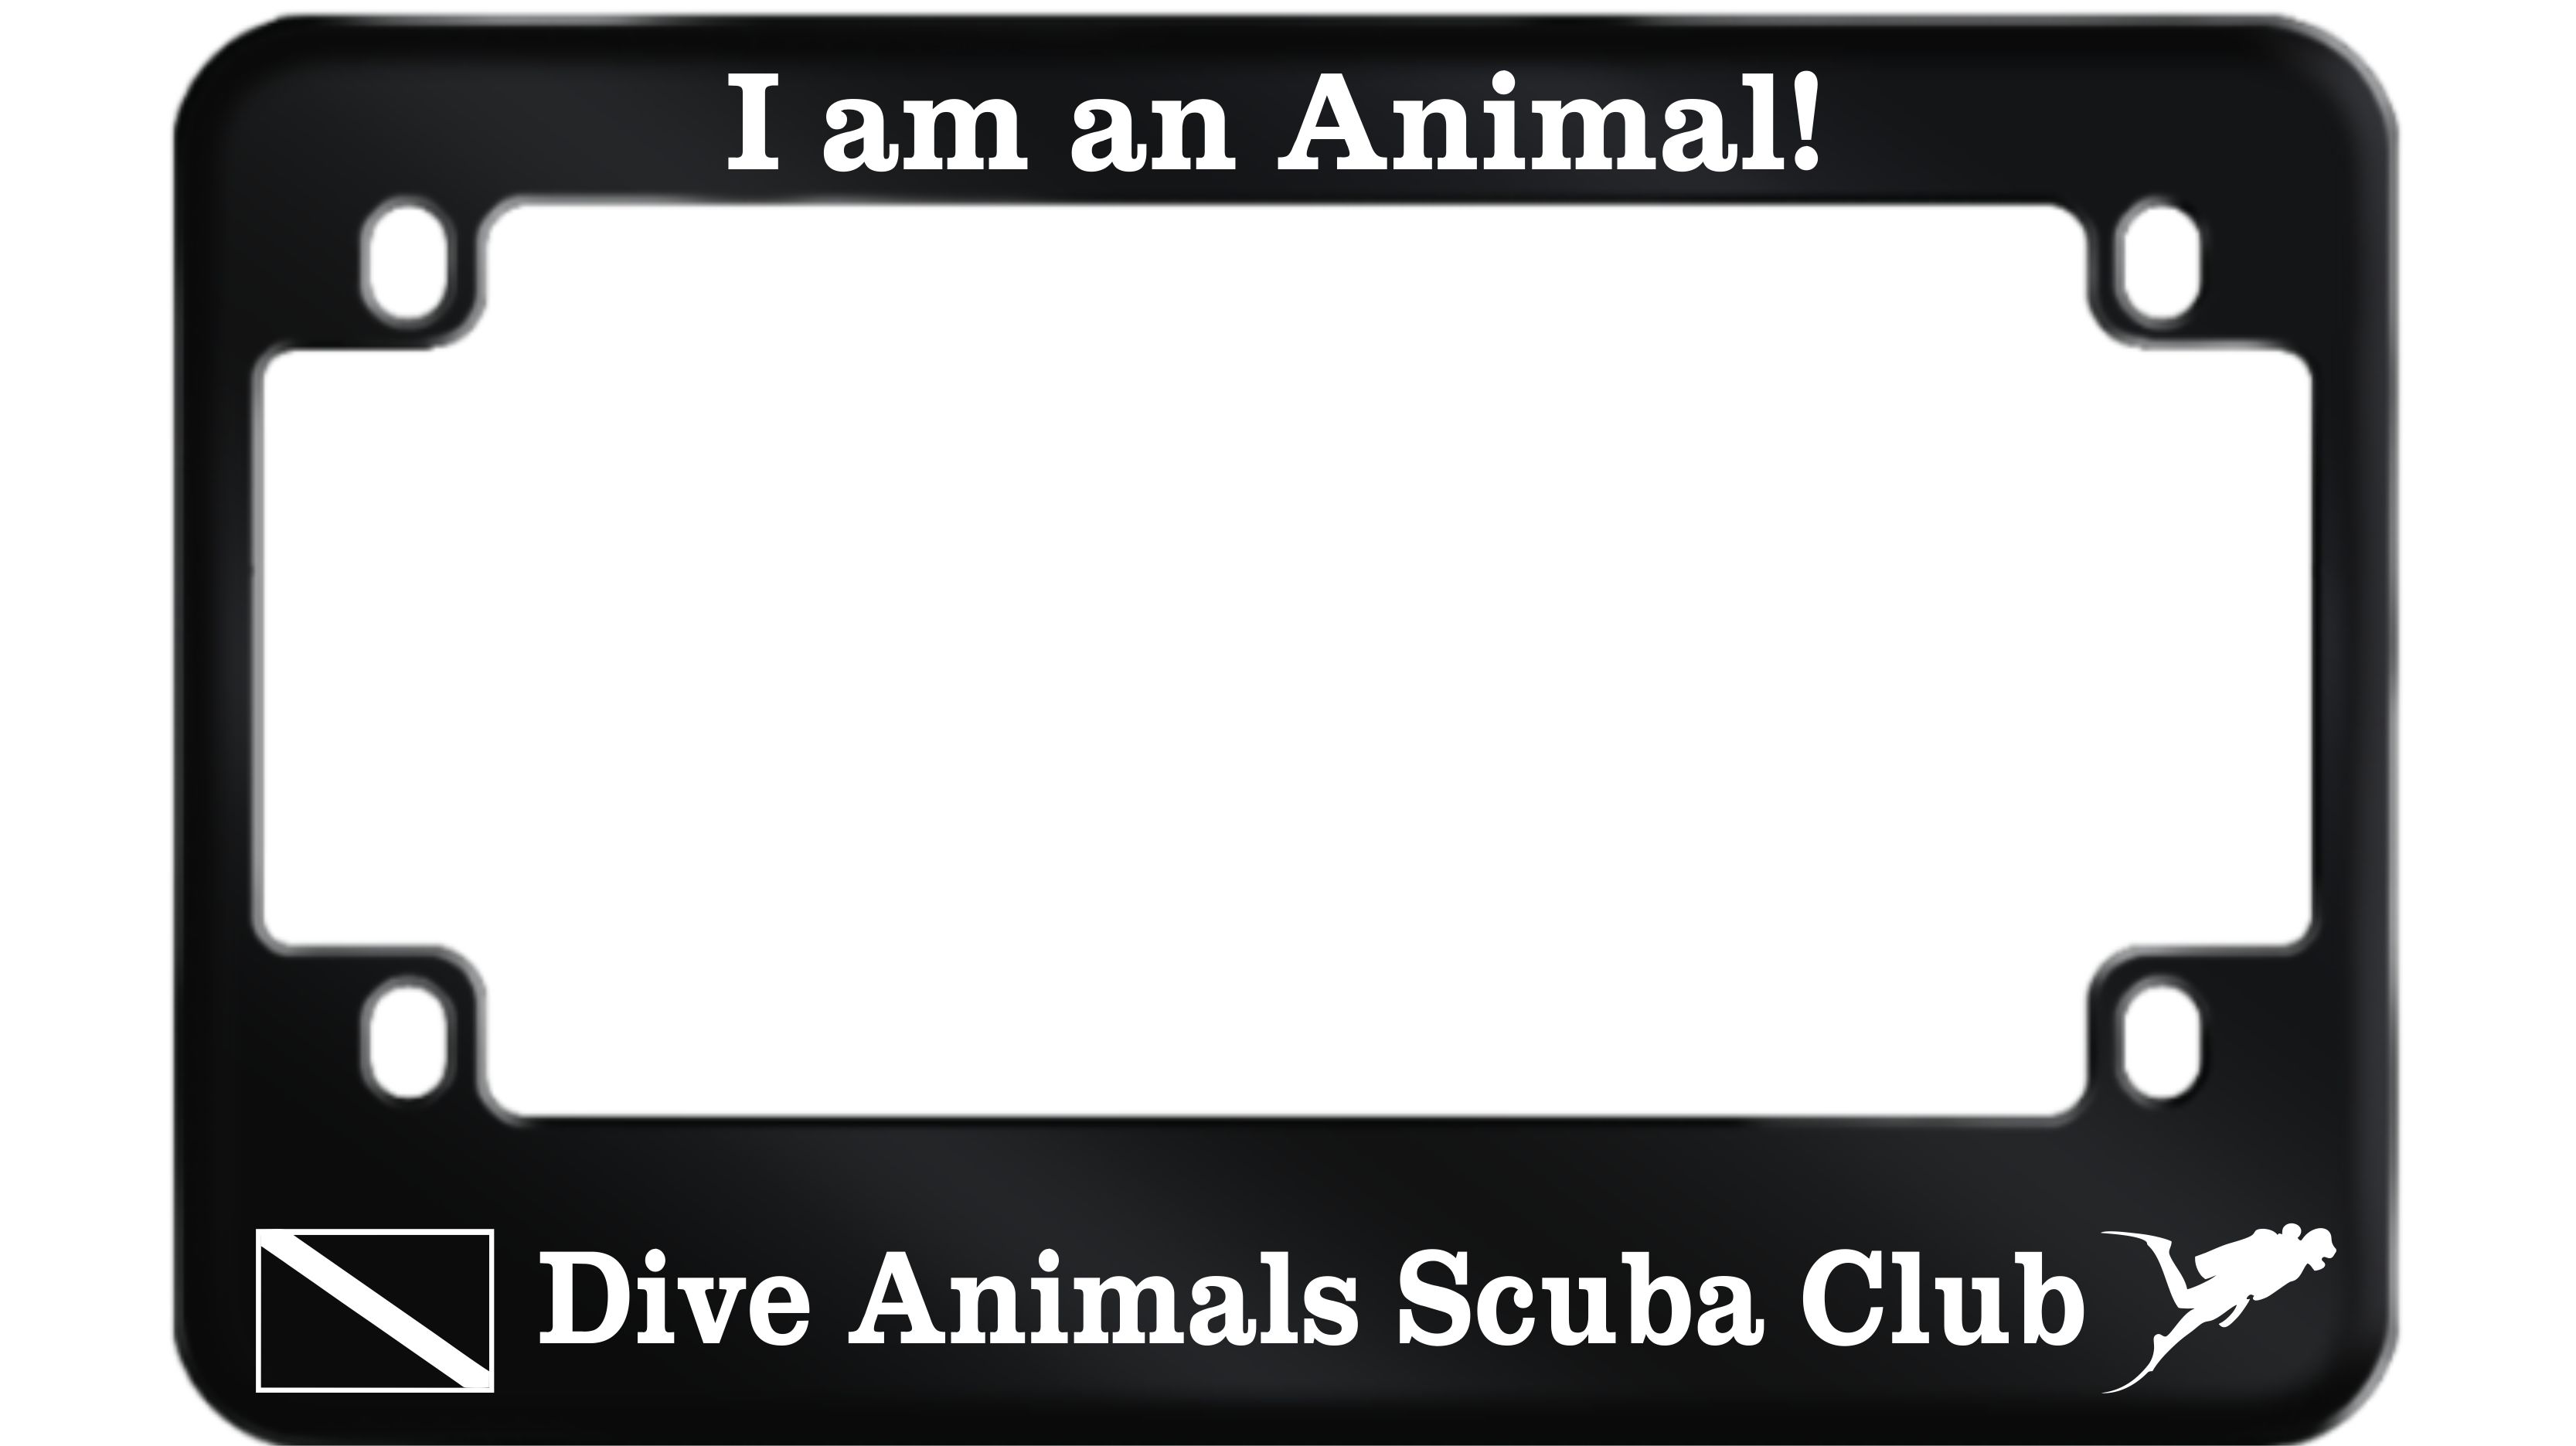 I am an Animal! - Custom Motorcycle Anodized Aluminum License Plate Frame